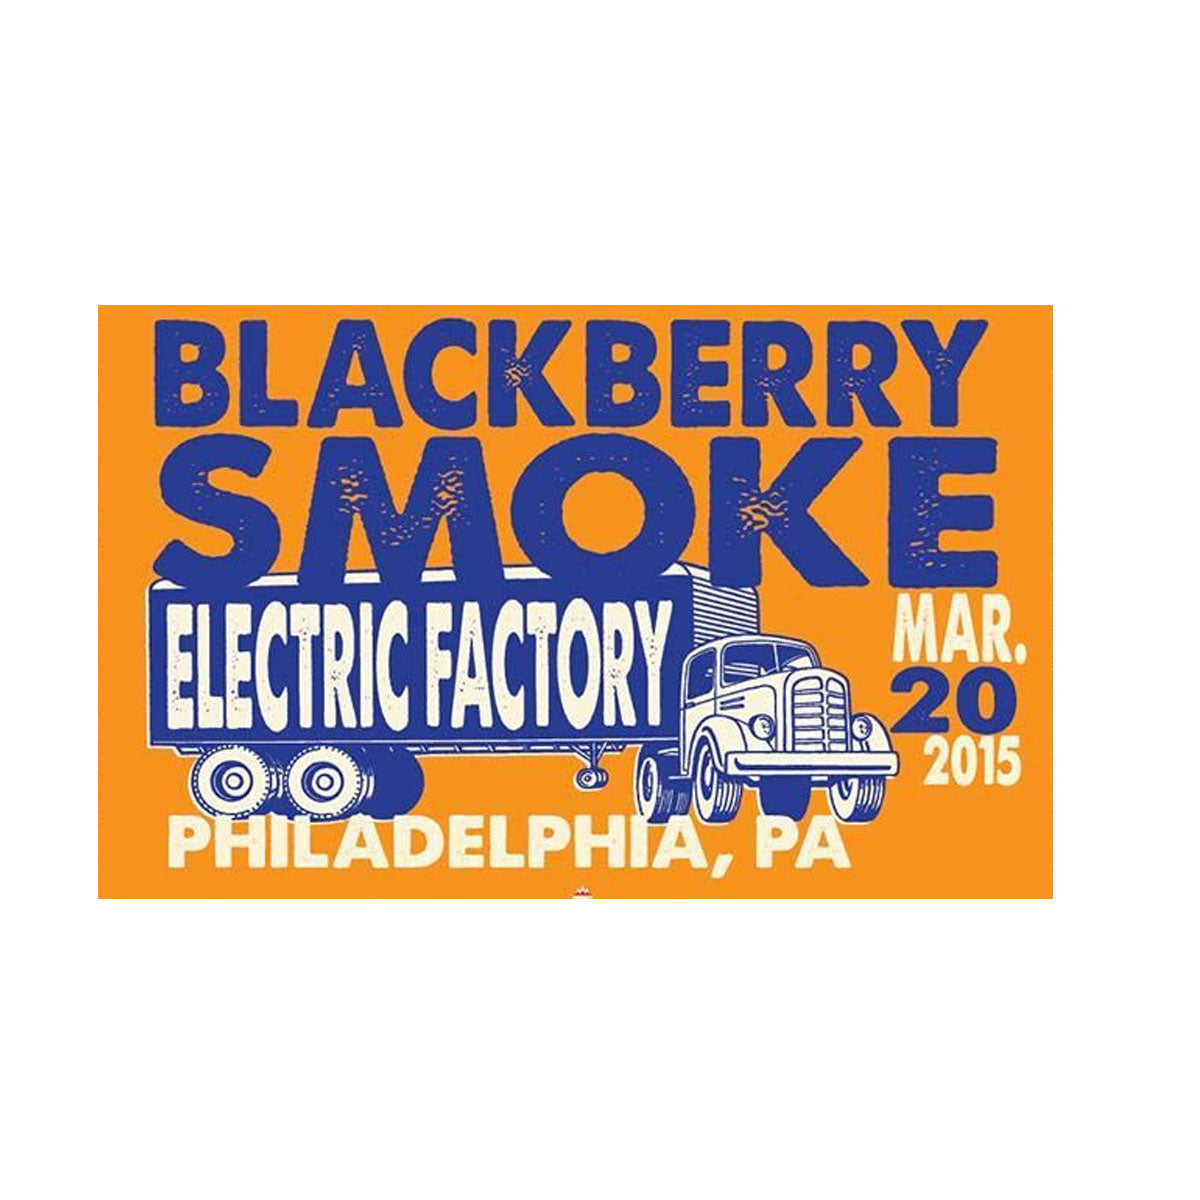 BBS Philadelphia Electric Factory Poster March 20, 2015 - D12